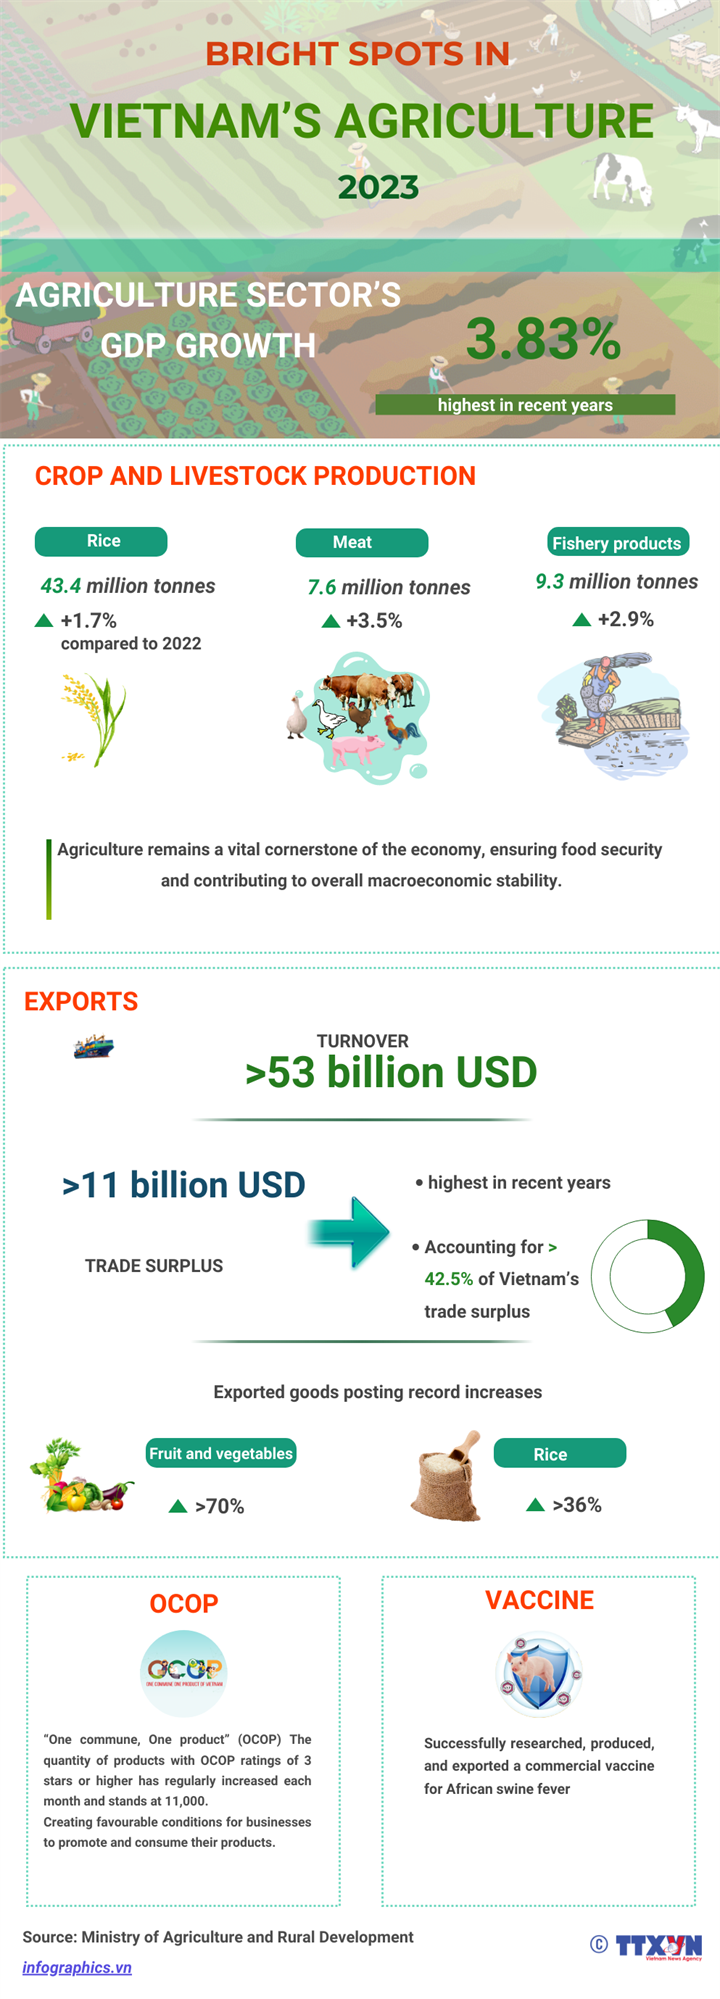 Bright spots seen in Vietnam’s agriculture sector in 2023